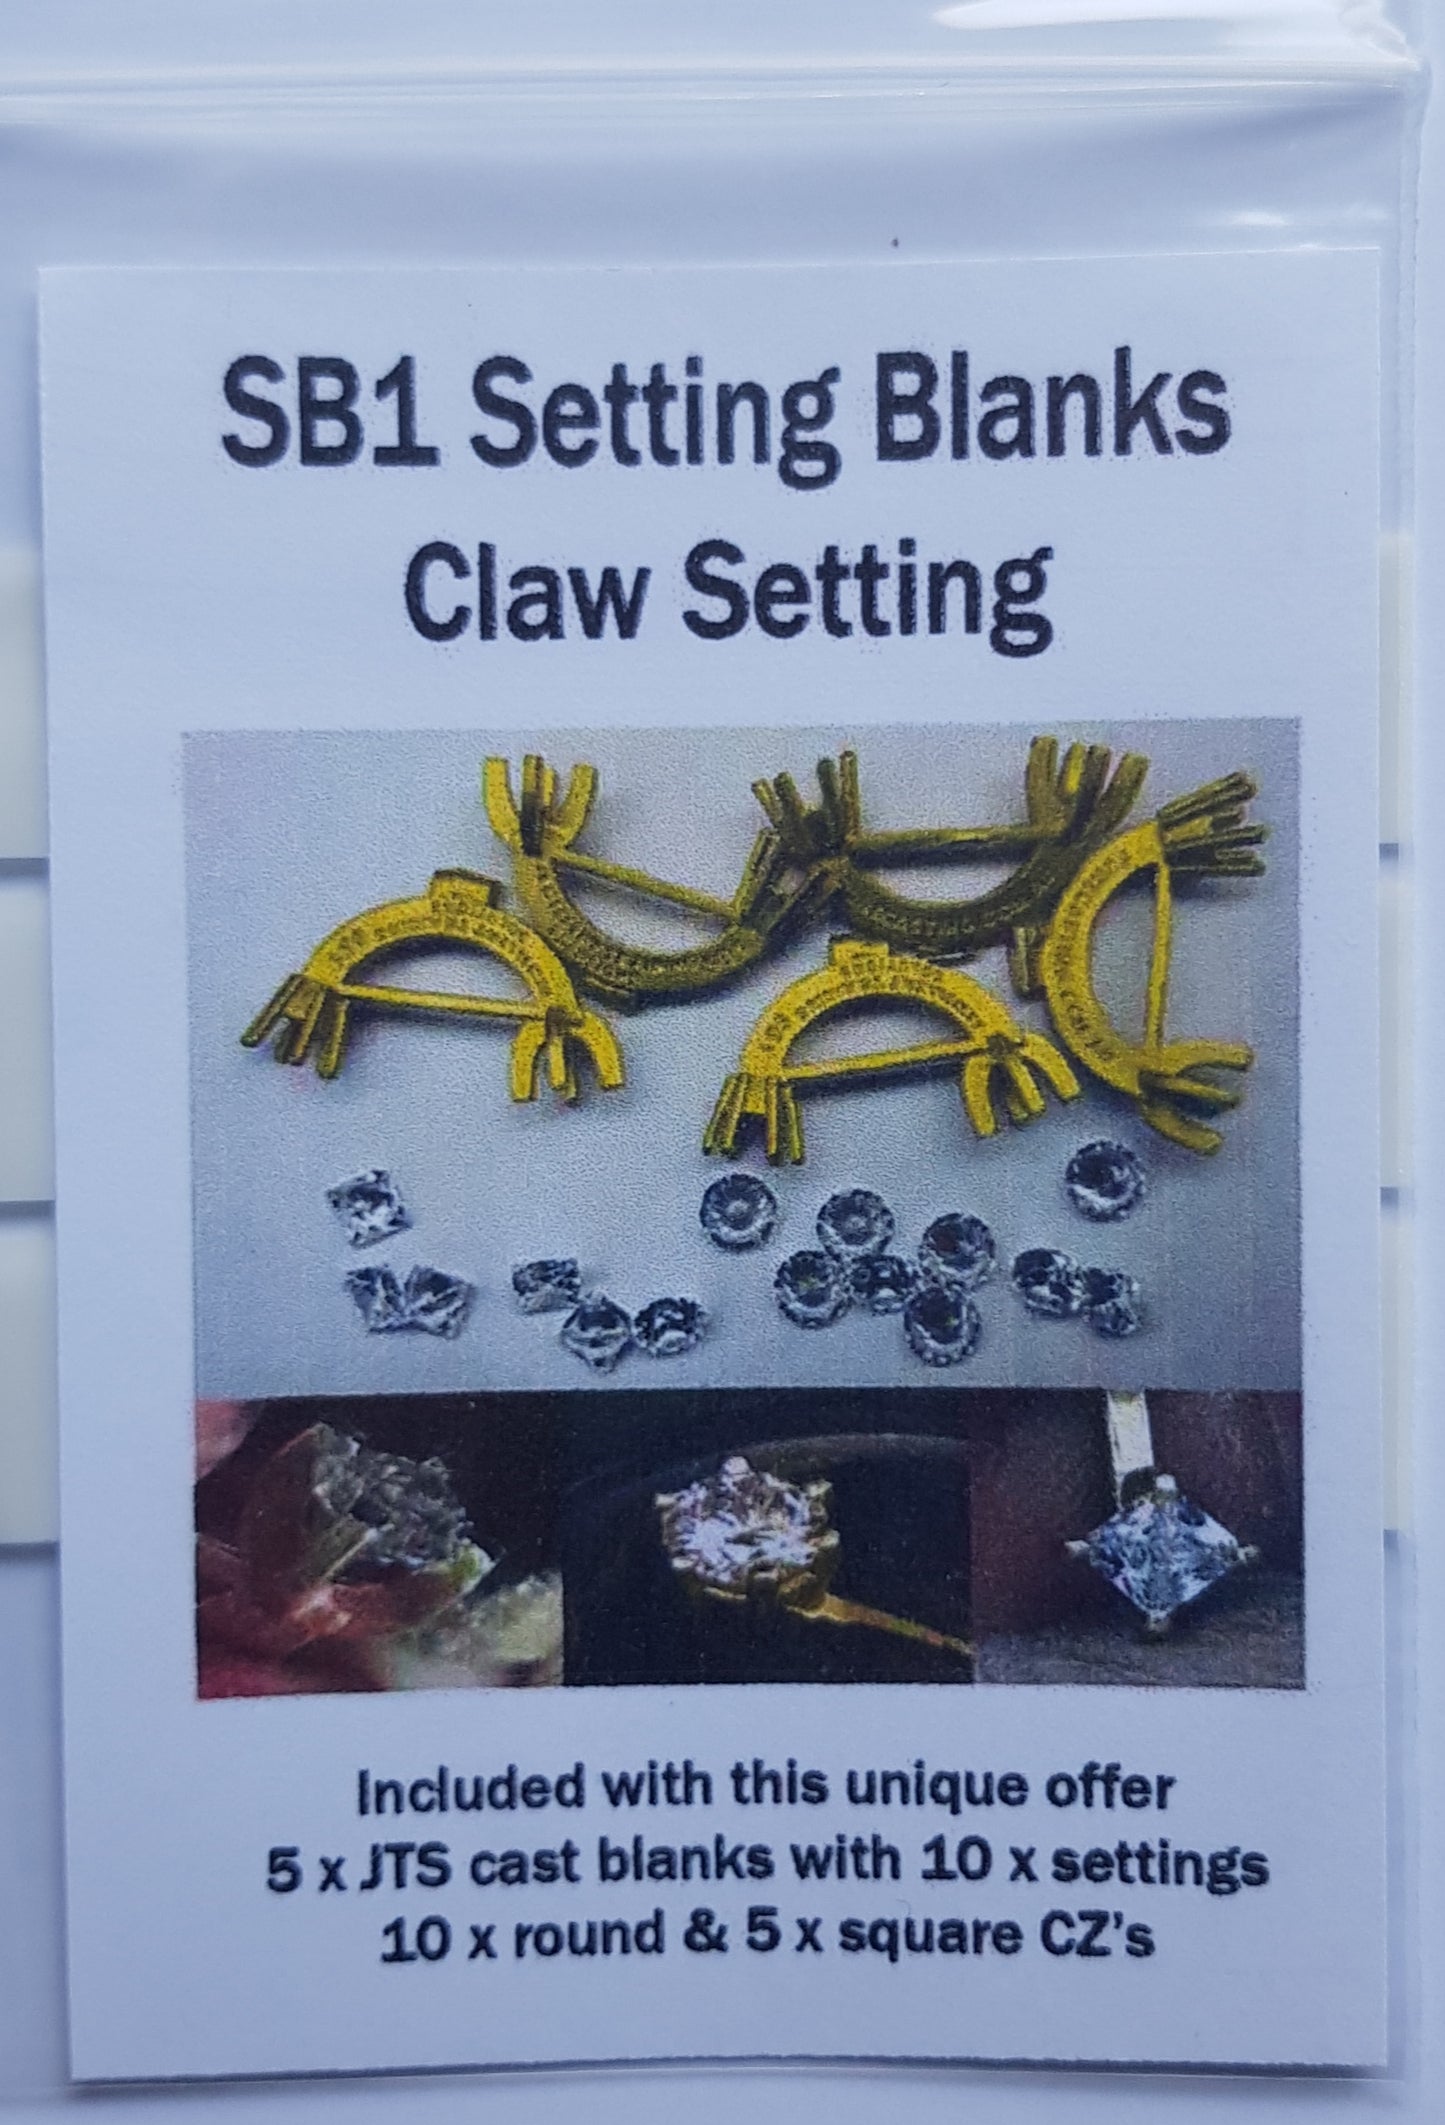 Claw Setting blanks (30% Off)